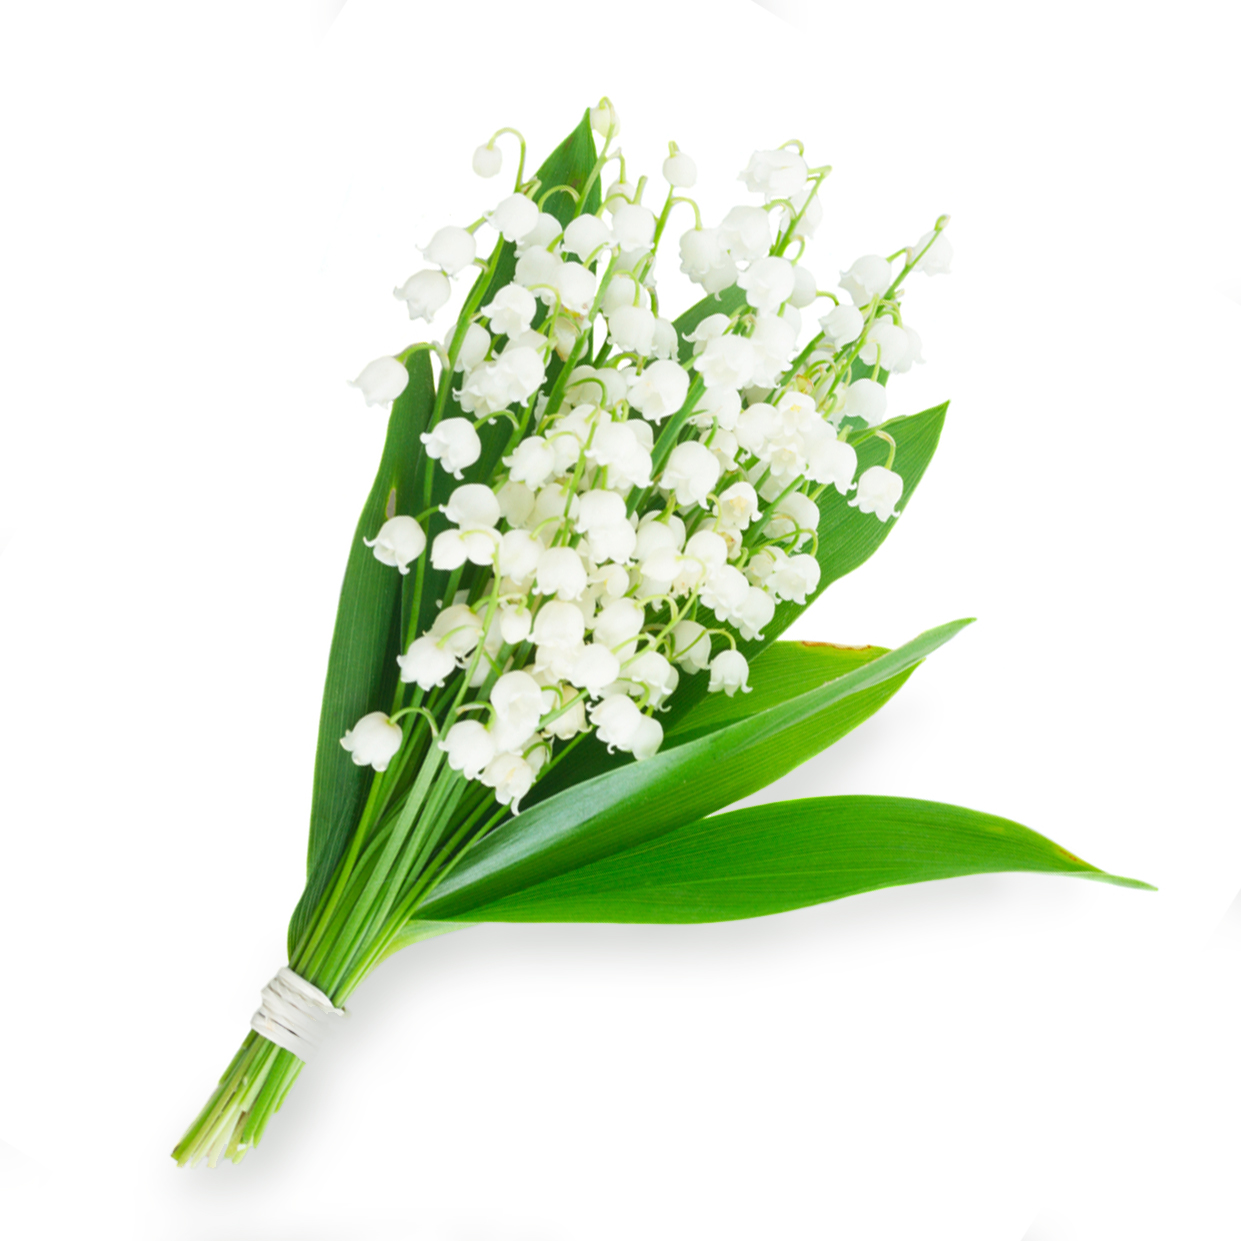 LILY OF THE VALLEY - sent on April 25th, 2022